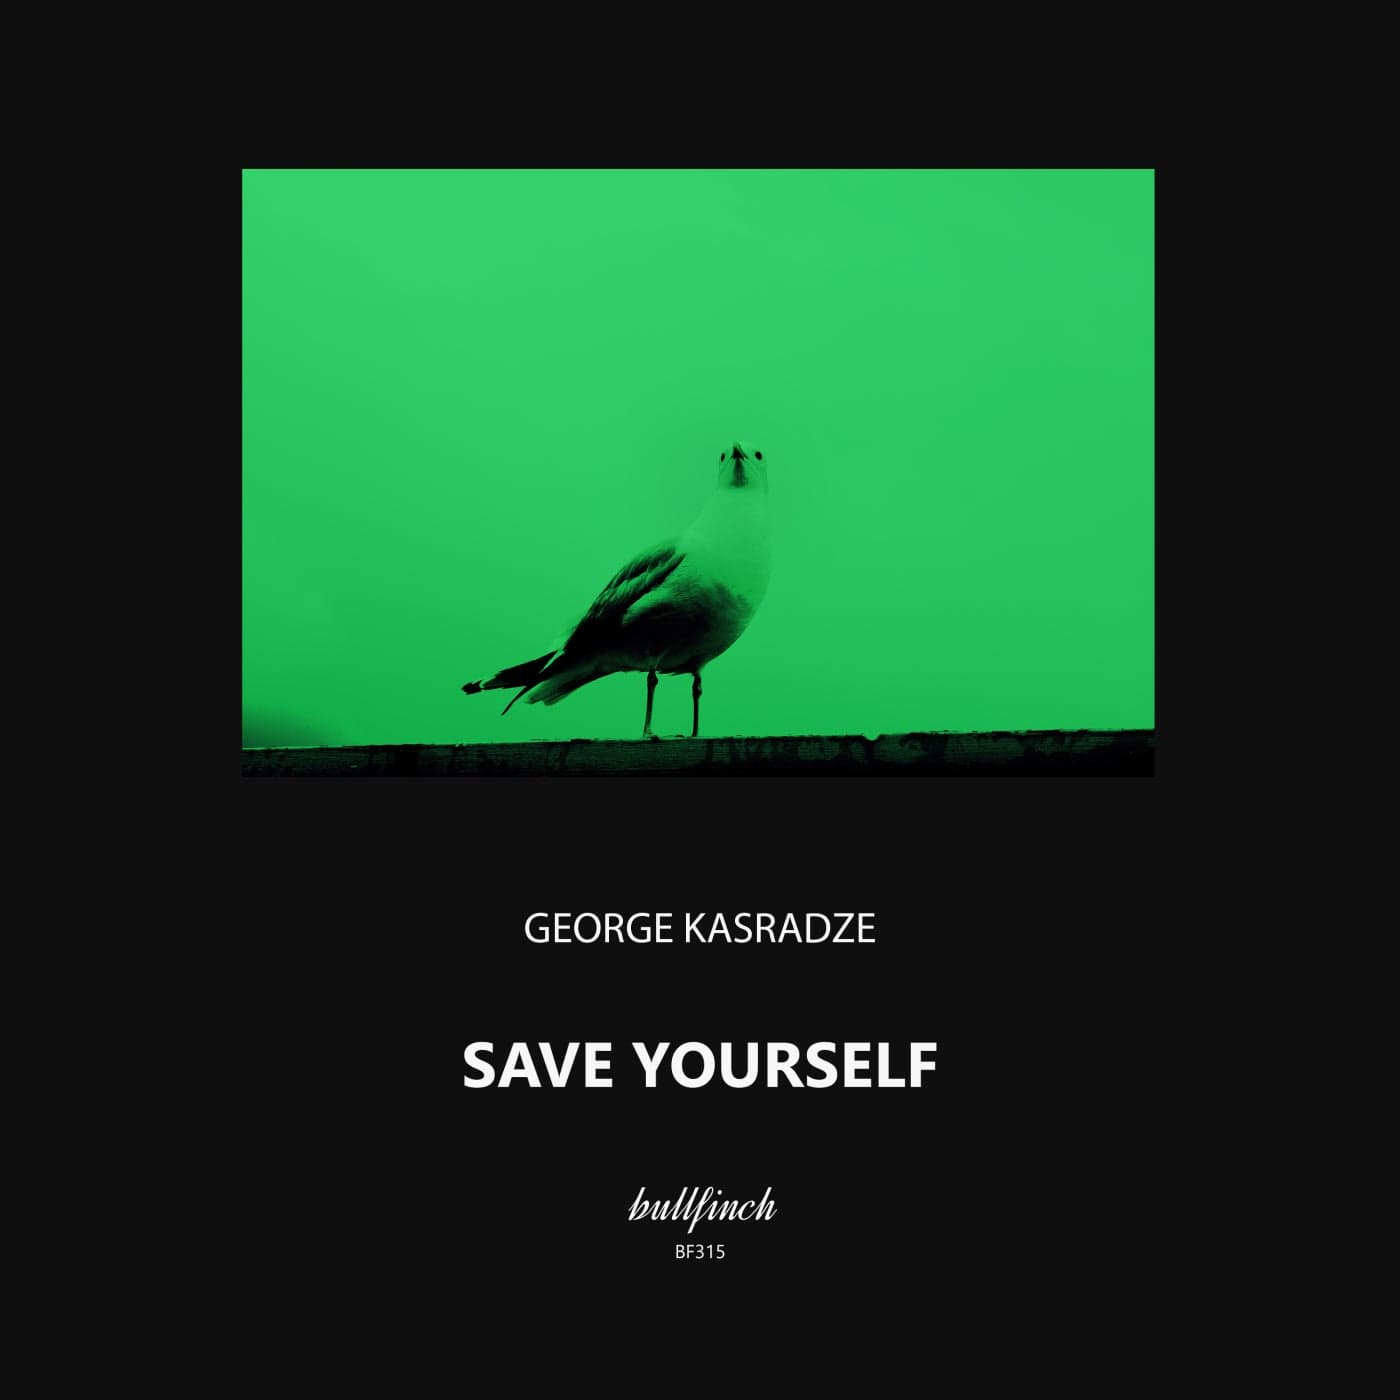 image cover: George Kasradze - Save Yourself / BF315